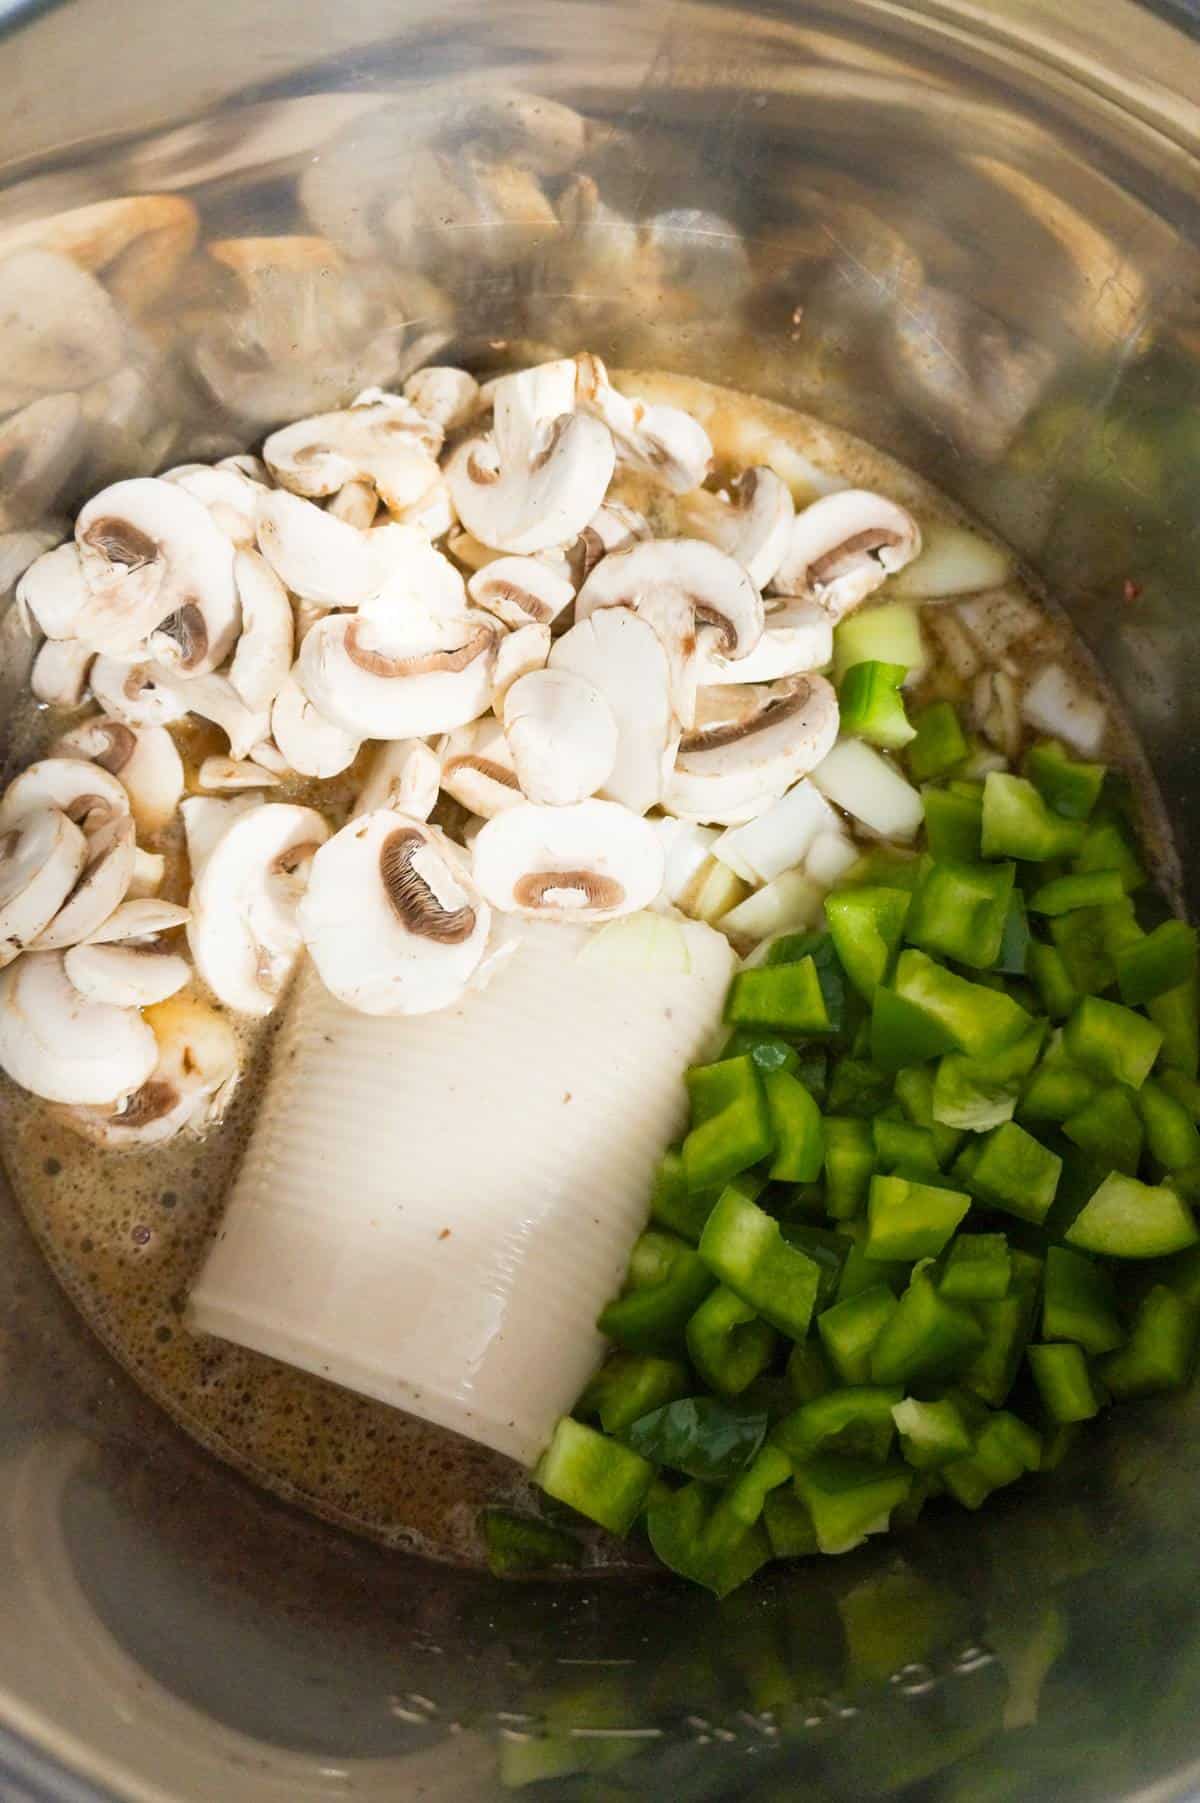 sliced mushrooms, diced green peppers and cream of mushroom soup in an Instant Pot